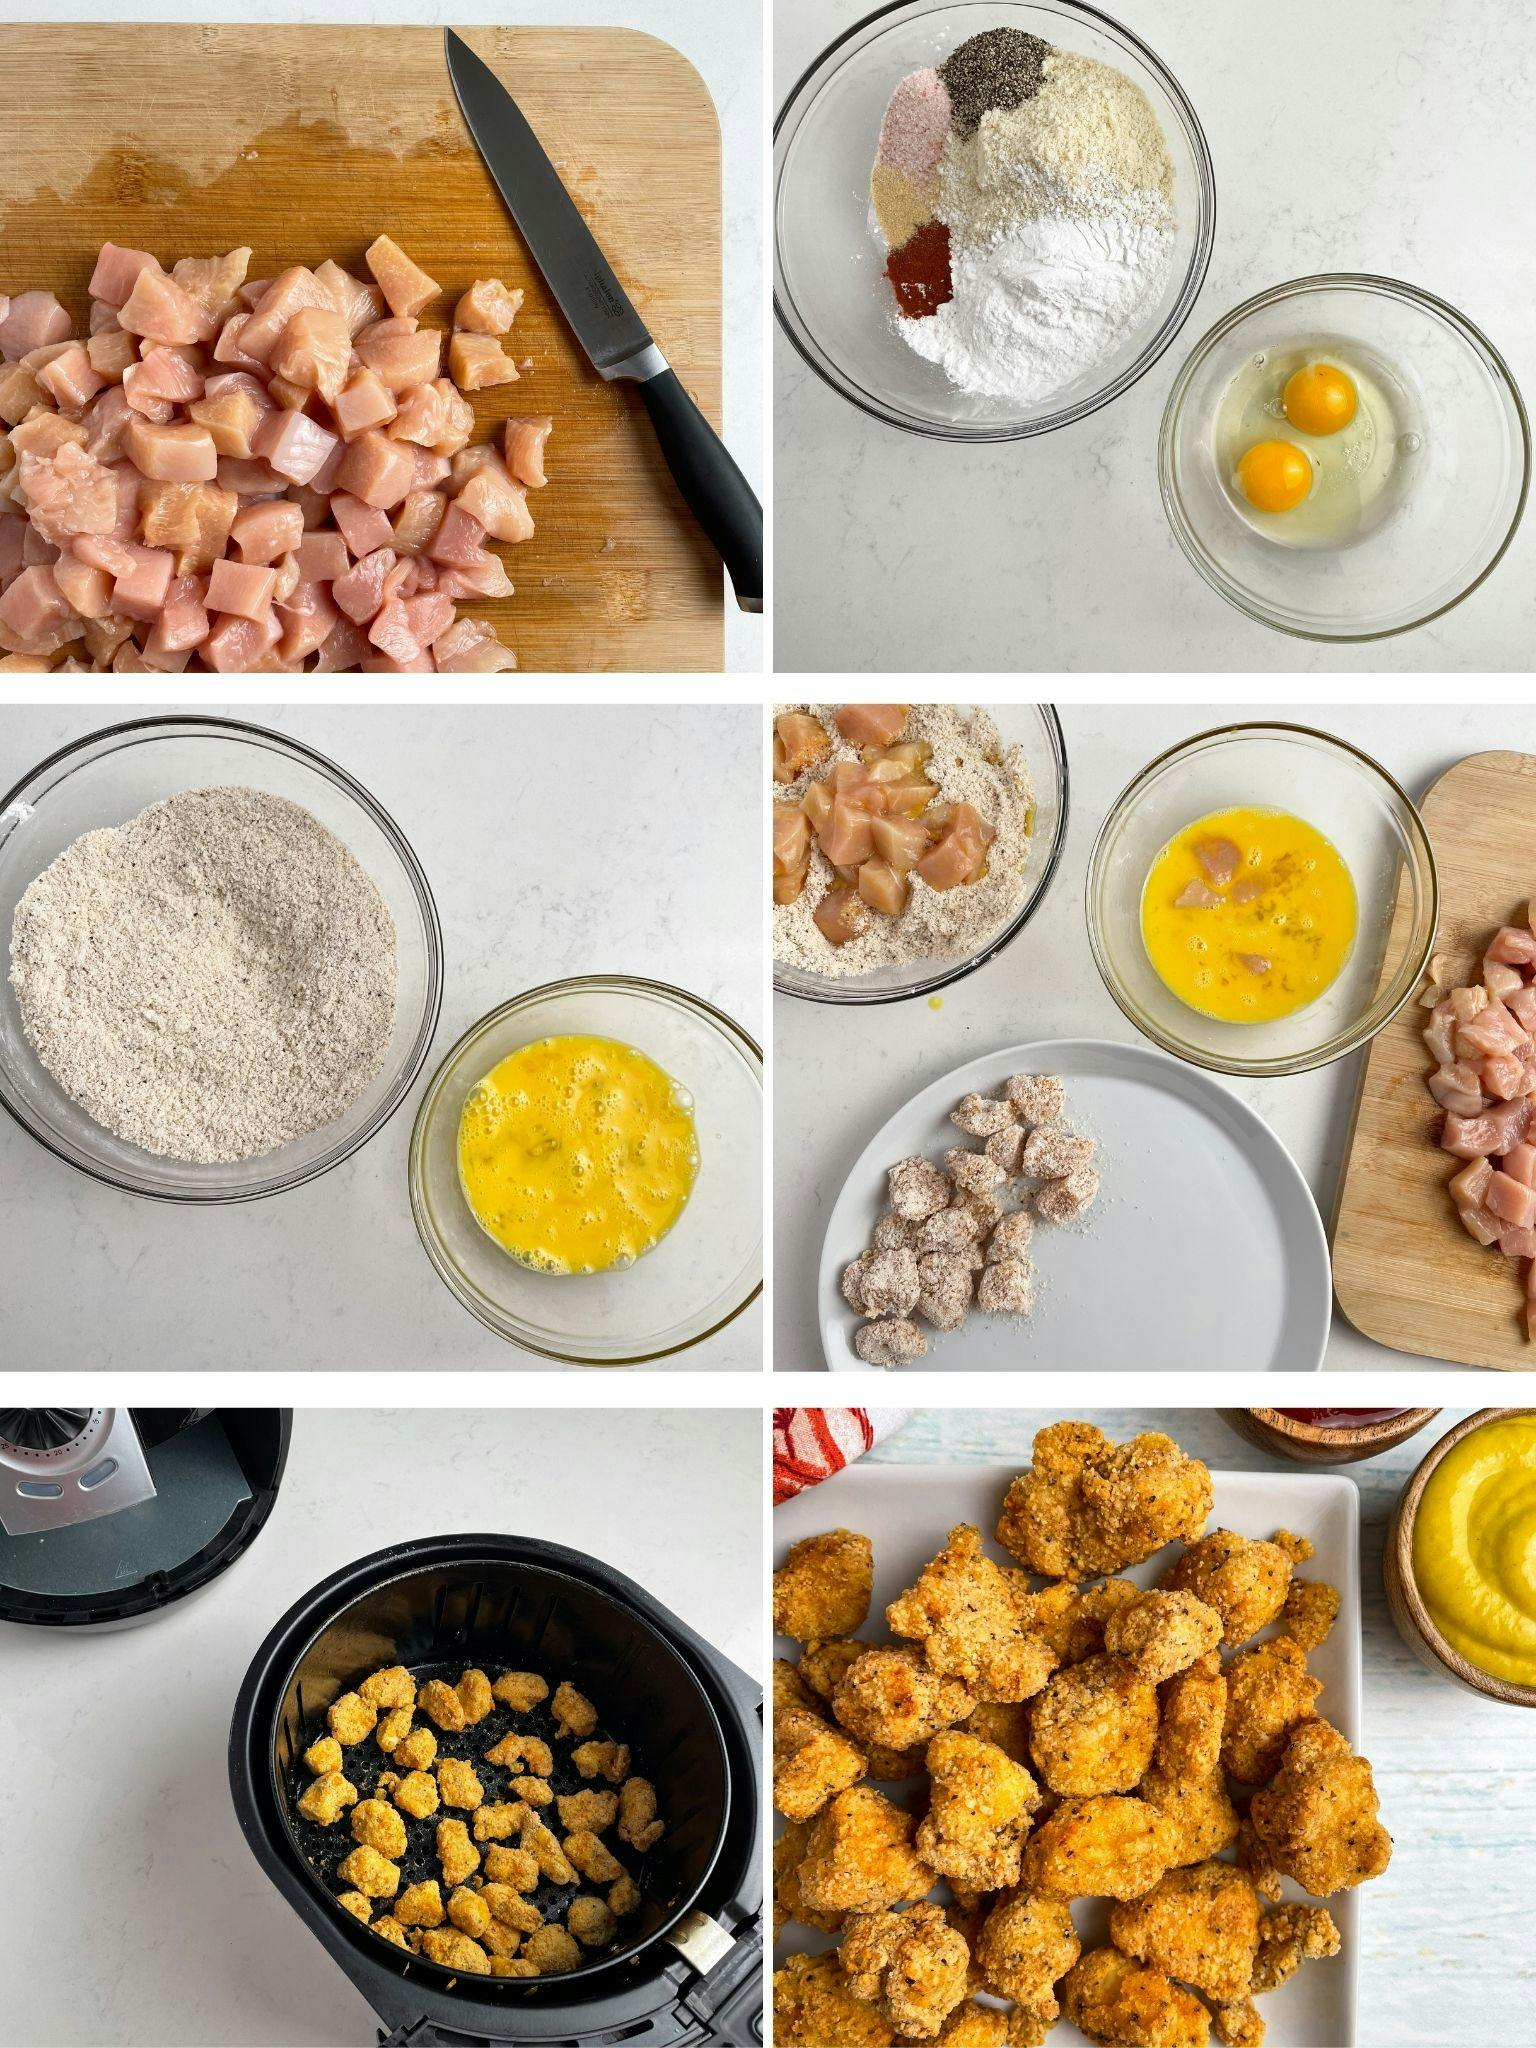 Step by step process of how to make the popcorn chicken.